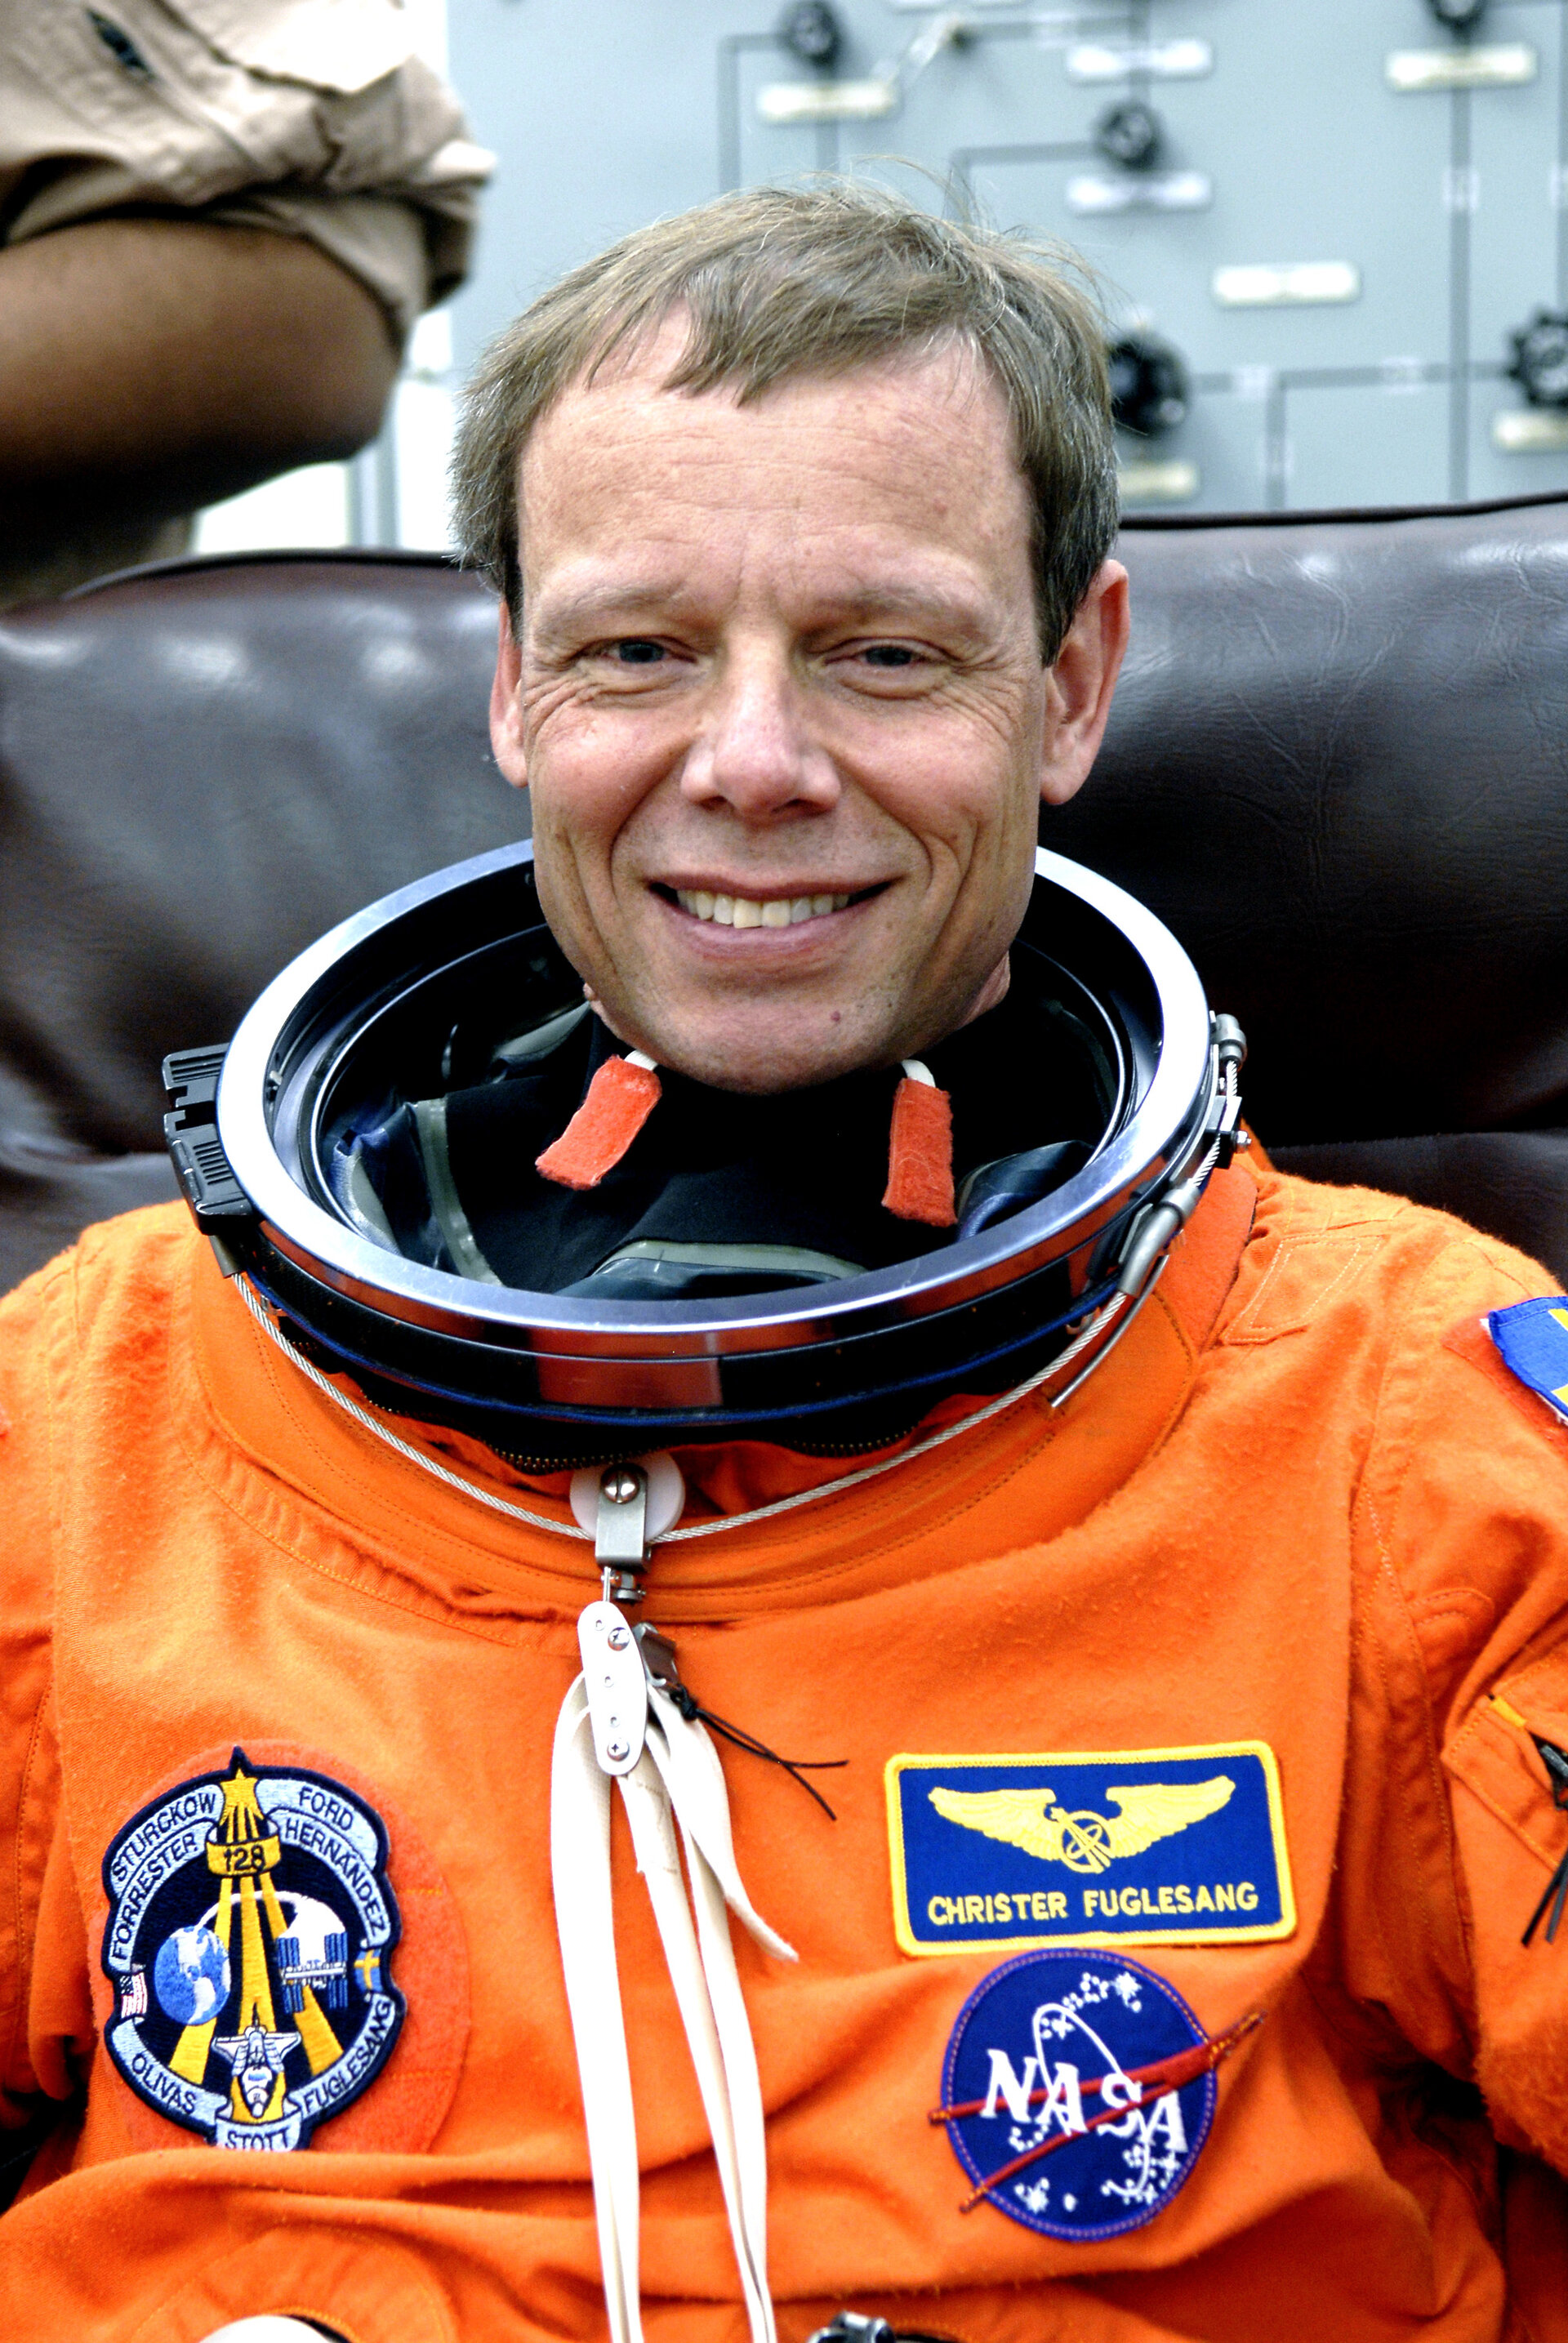 Christer Fuglesang dons launch and entry suit for simulated launch countdown